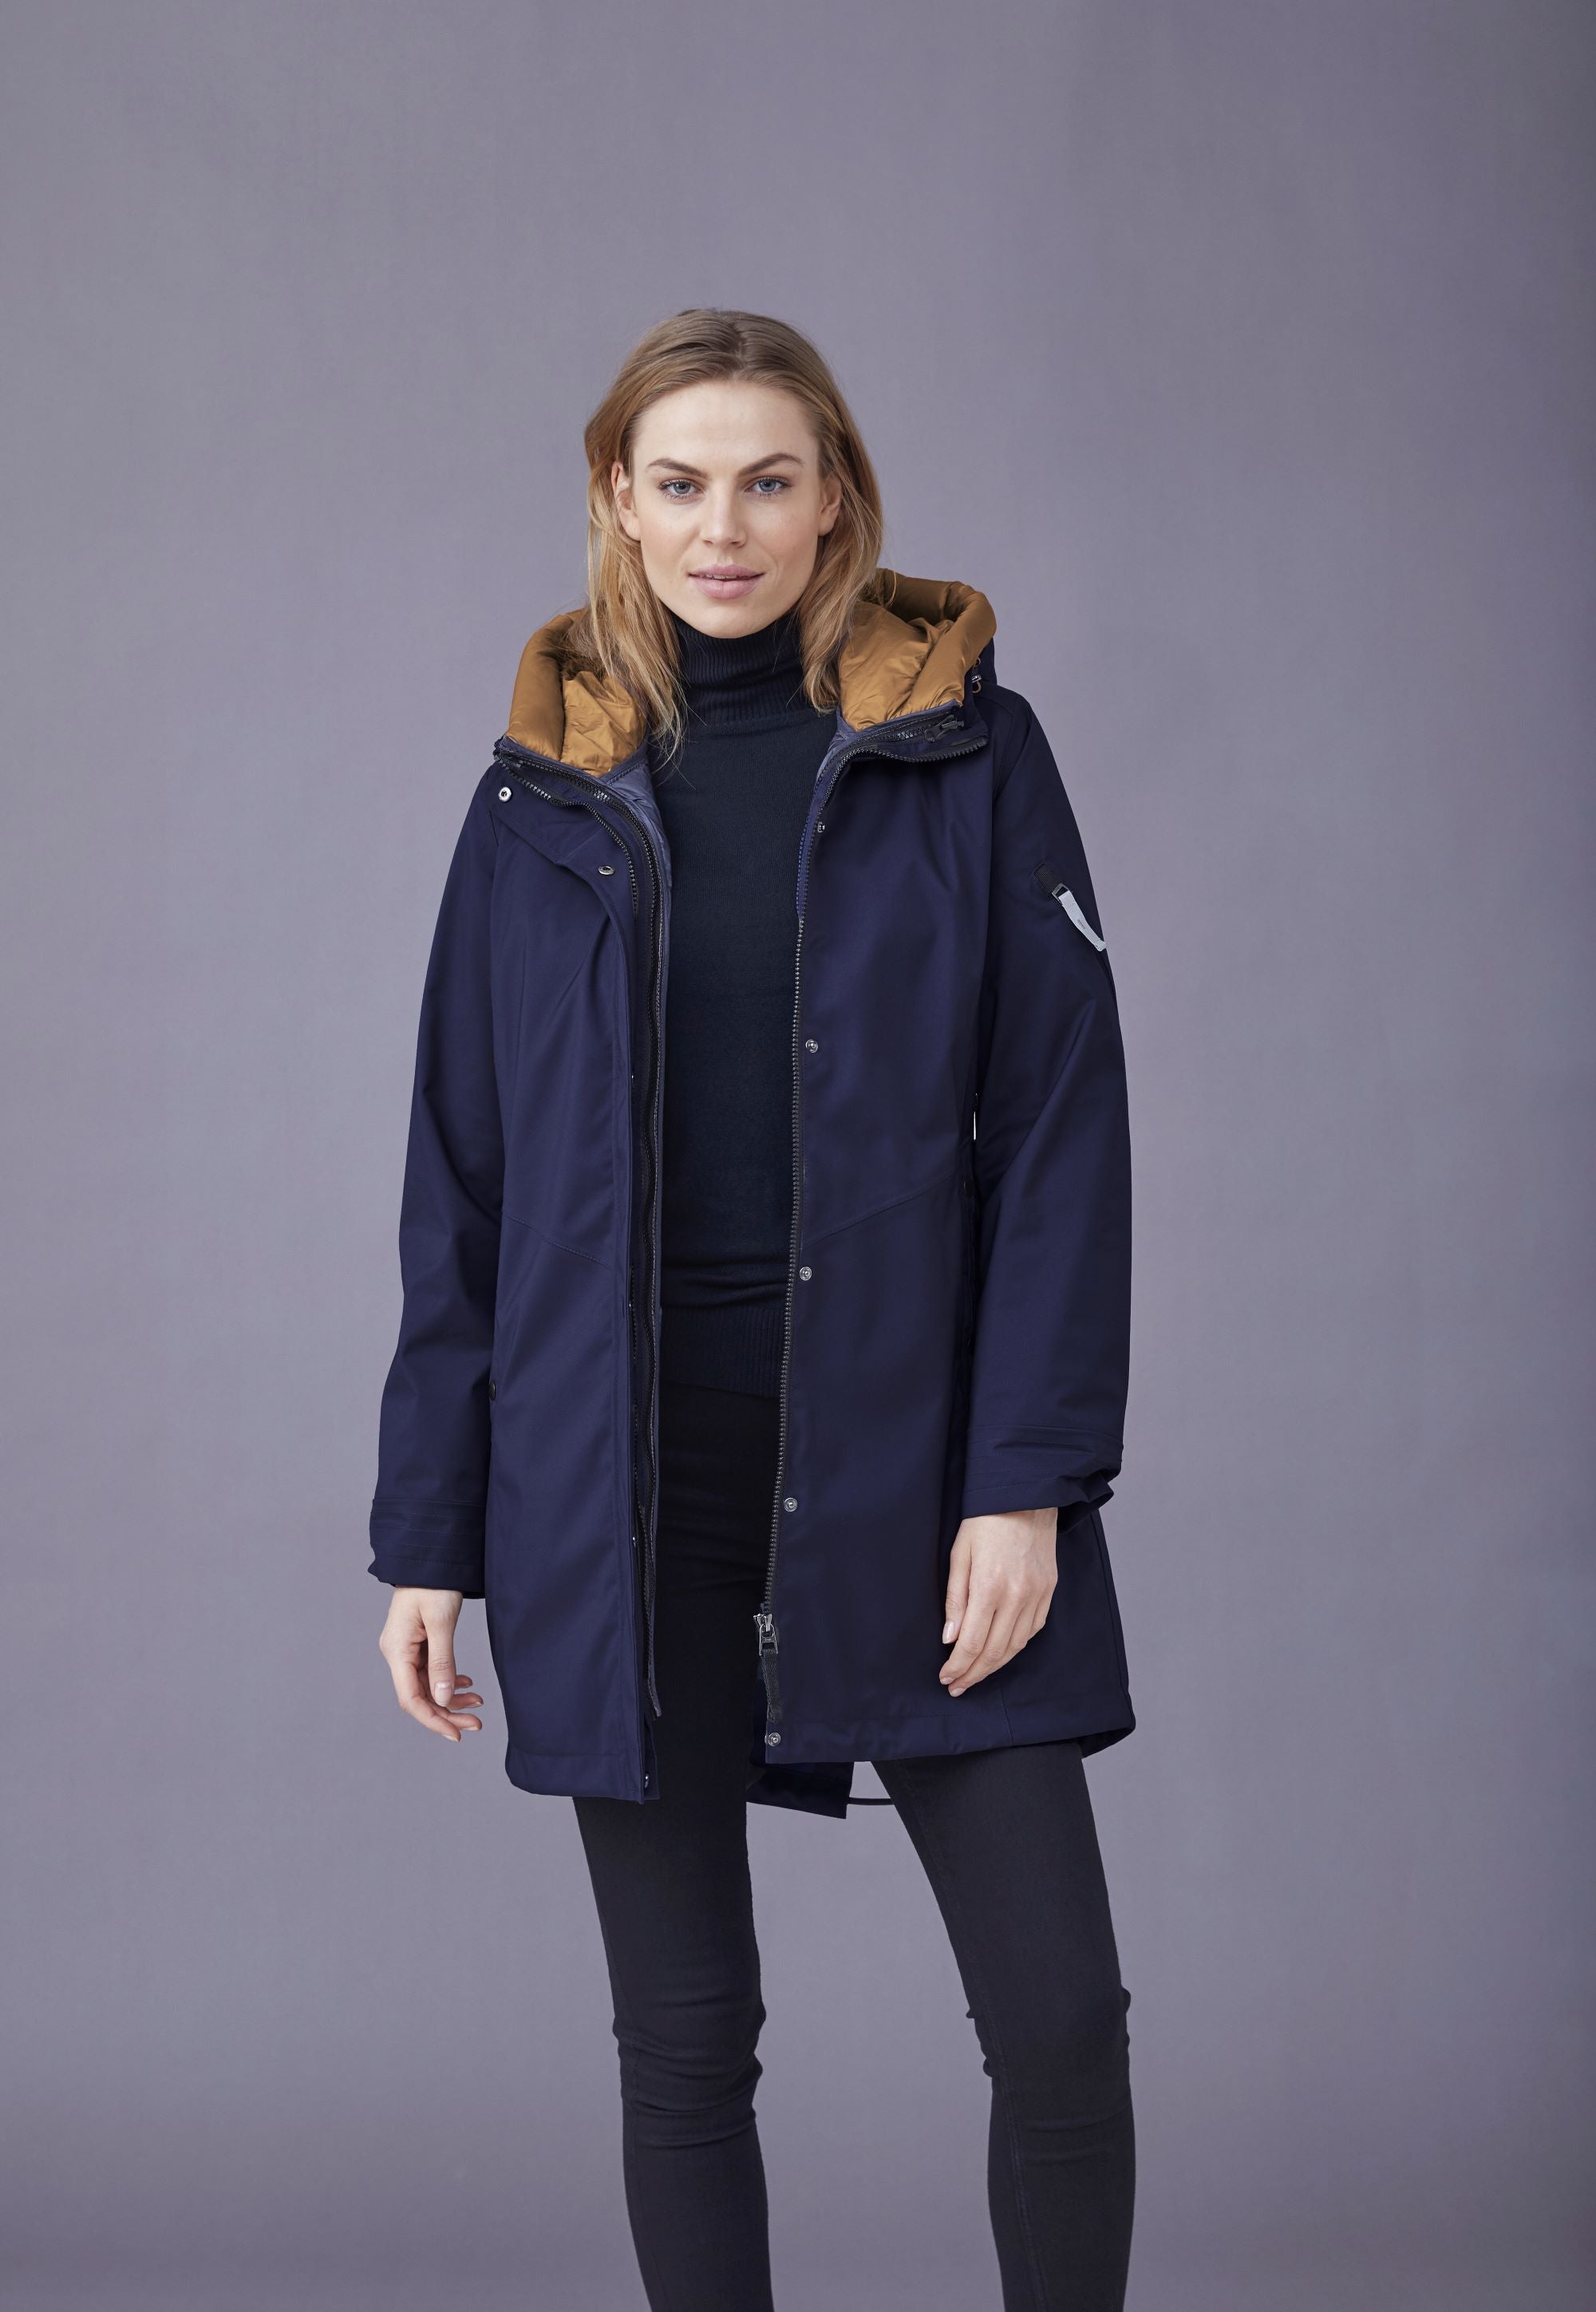 Winter Jackets | Occasion Timeless Choices For – 2 Every | Page